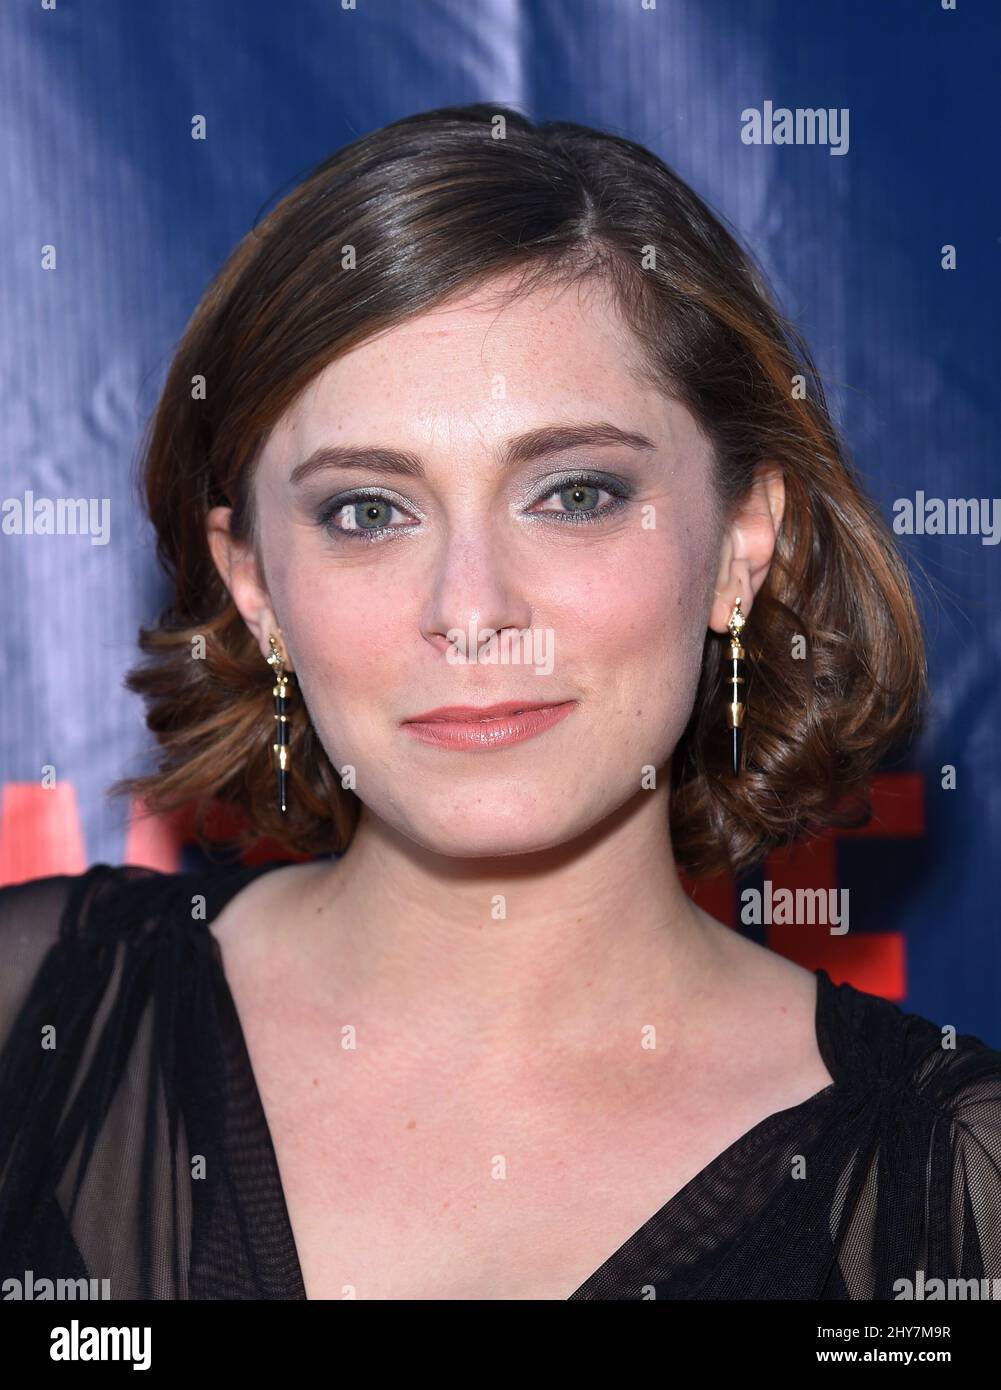 Rachel Bloom attending the CBS, The CW and Showtime Summer TCA press tour. Stock Photo